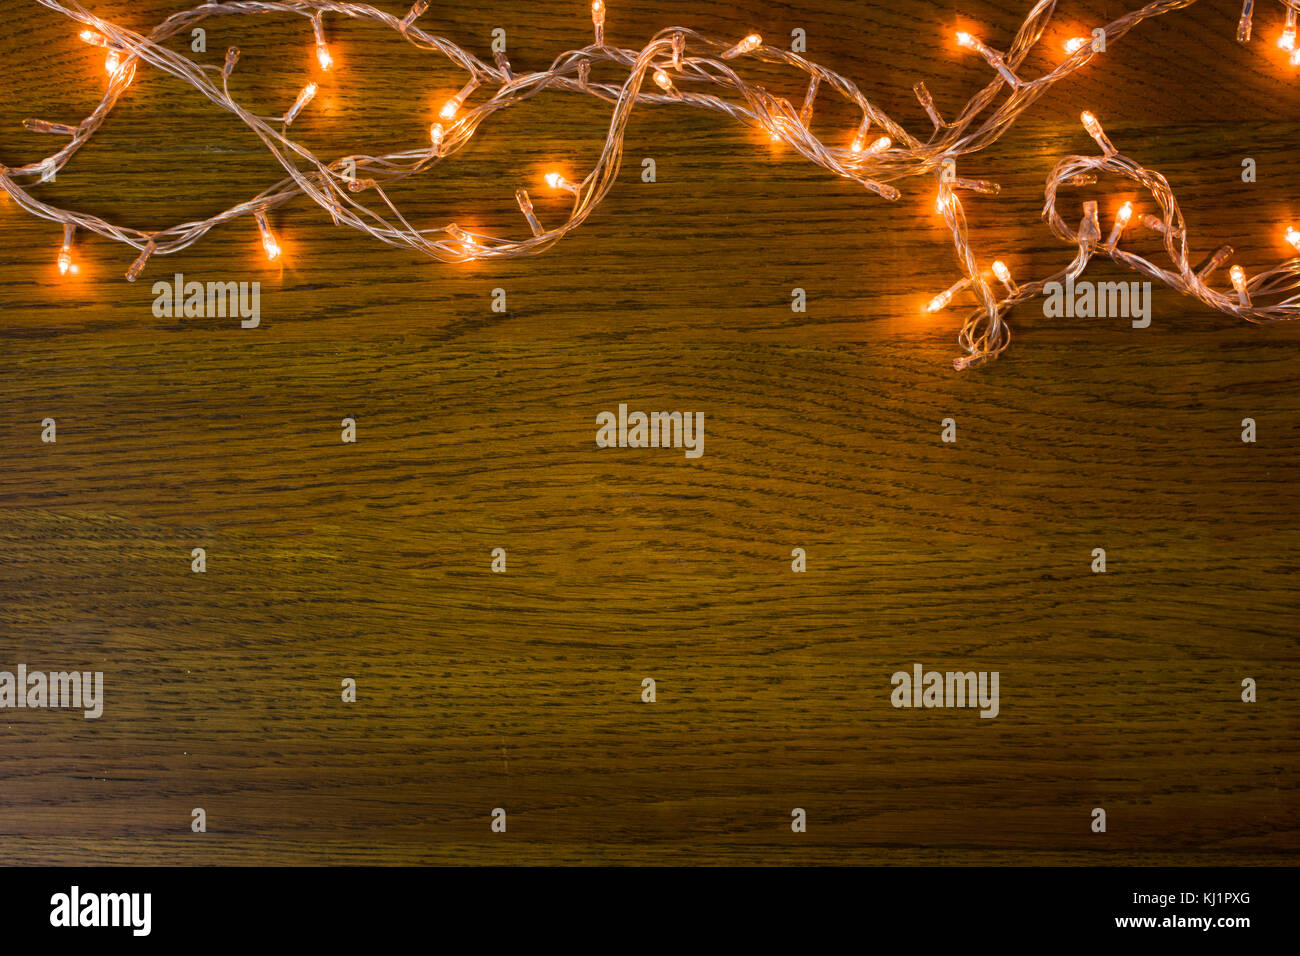 Christmas lights on wooden background with copy space Stock Photo